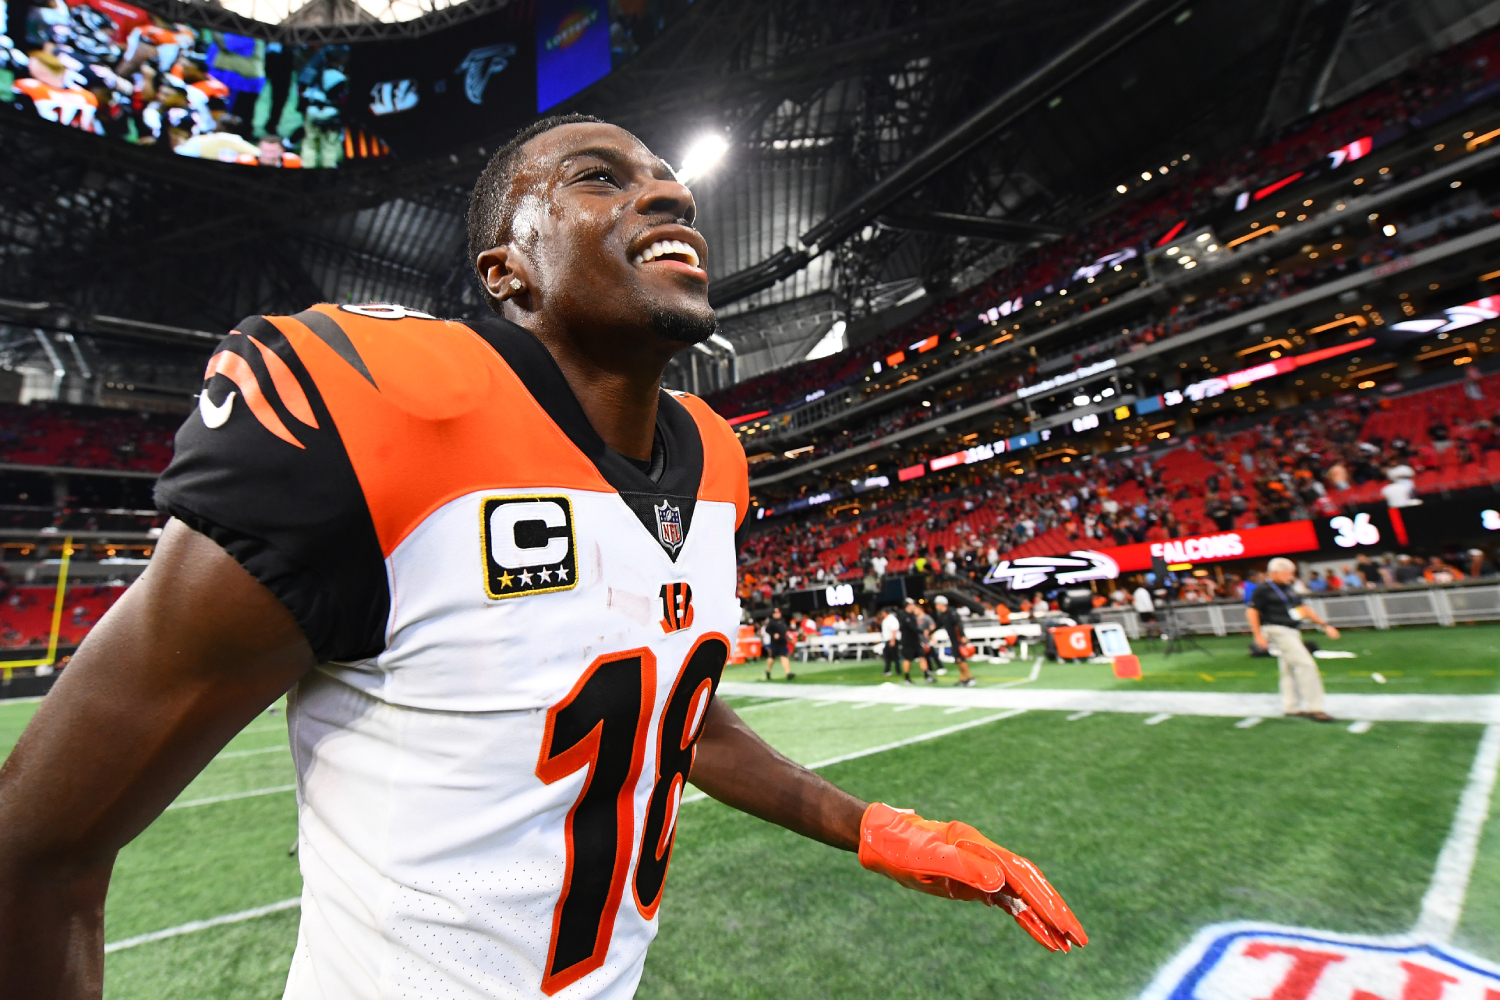 A.J. Green has been a stellar wide receiver for the Cincinnati Bengals, which has helped him make a lot of money. So, what is his net worth?